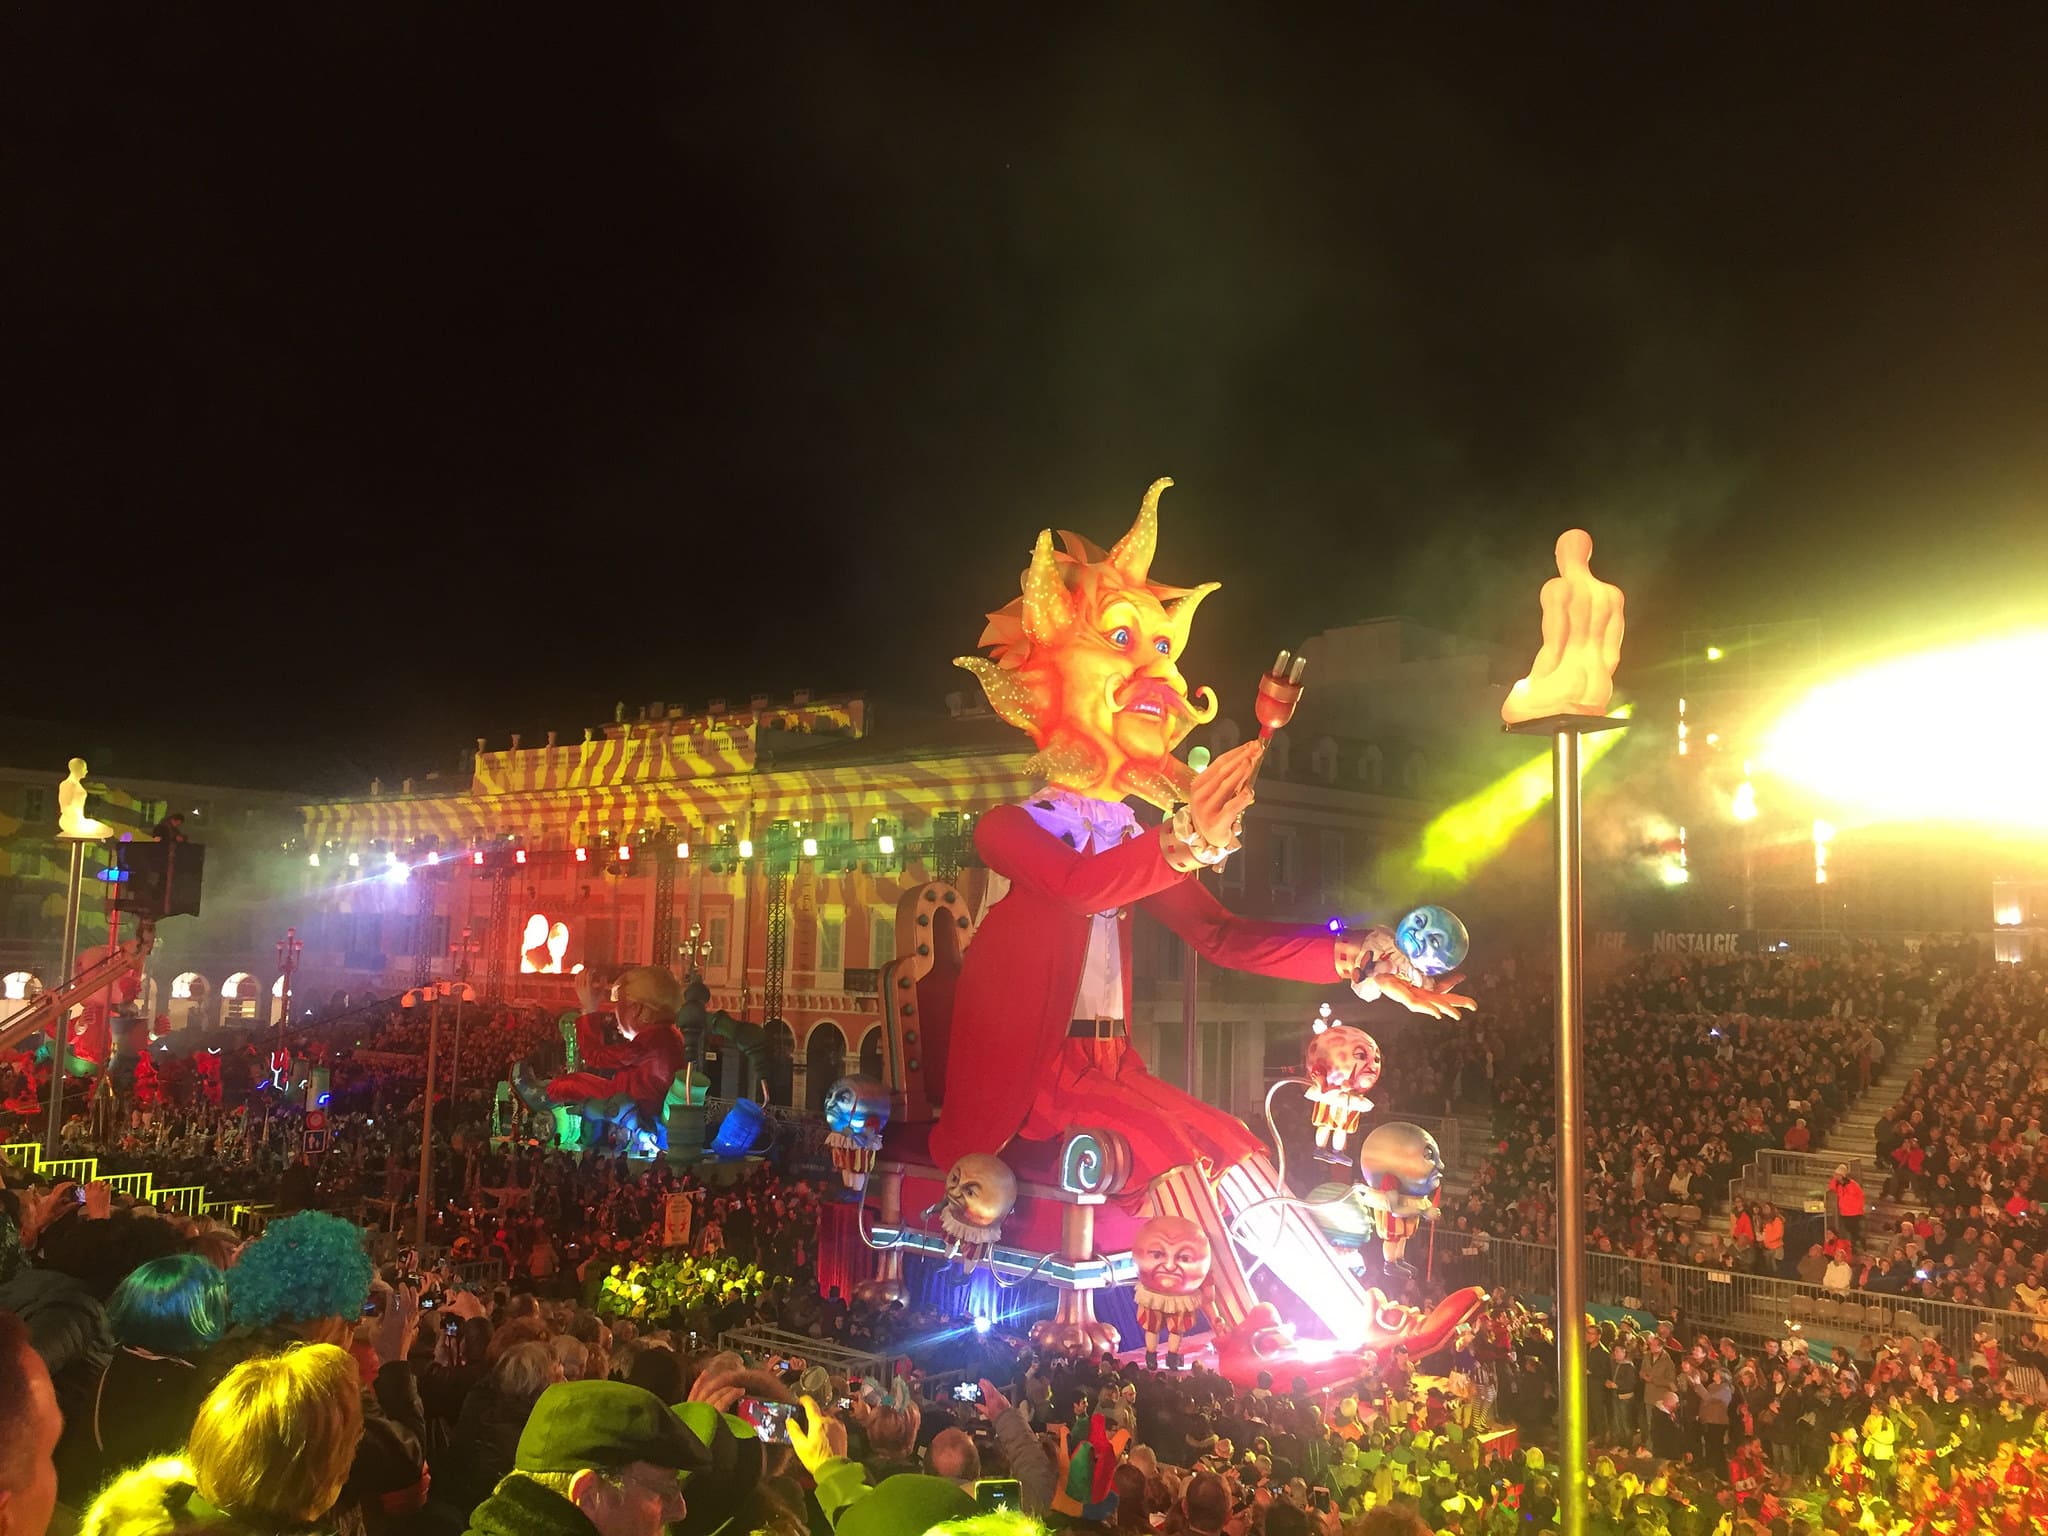 Things to do in Nice, Places to visit in Nice, Festivals in Nice, Carnaval de Nice